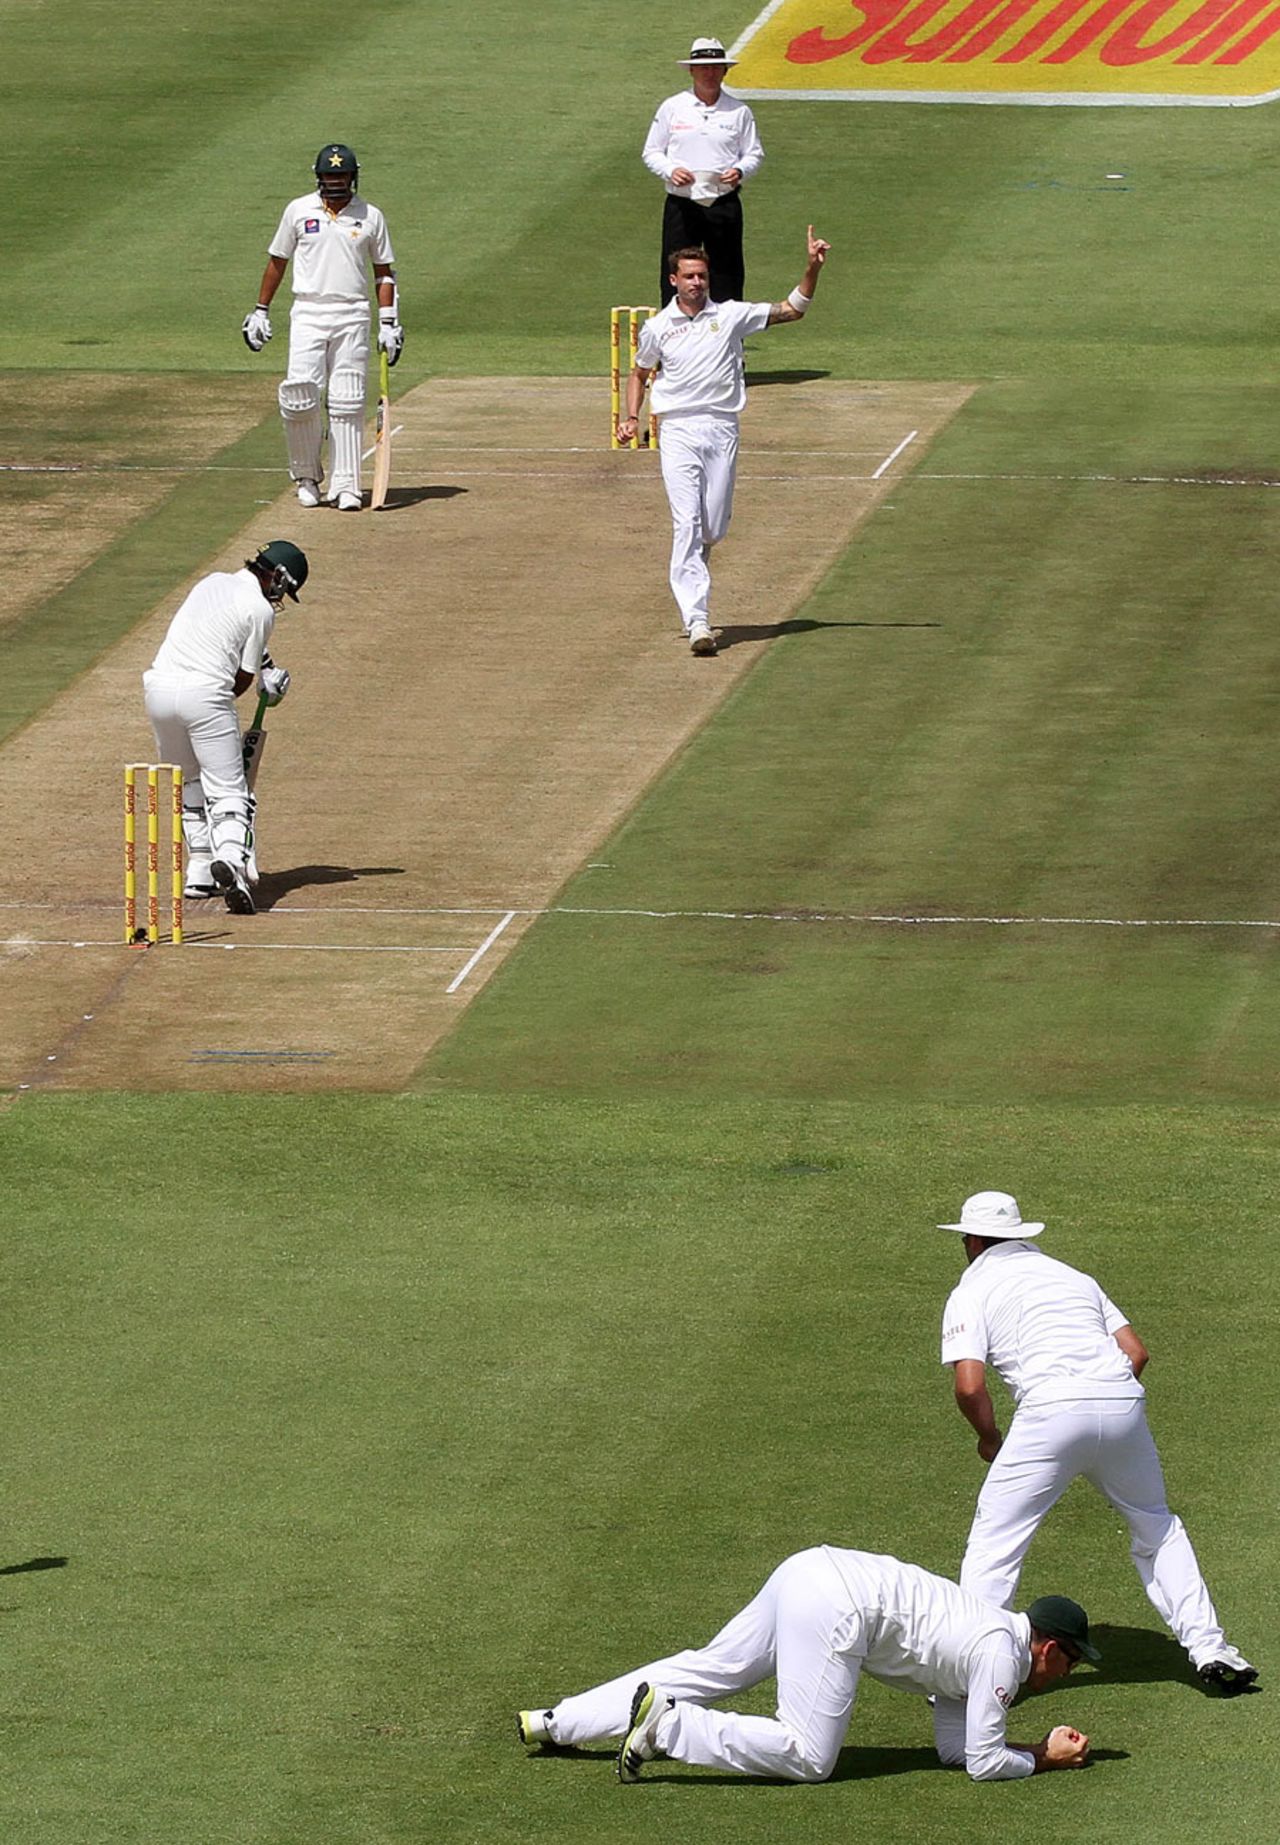 Dale Steyn had Mohammad Hafeez edging to slip, South Africa v Pakistan, 2nd Test, Cape Town, 1st day, February 14, 2013